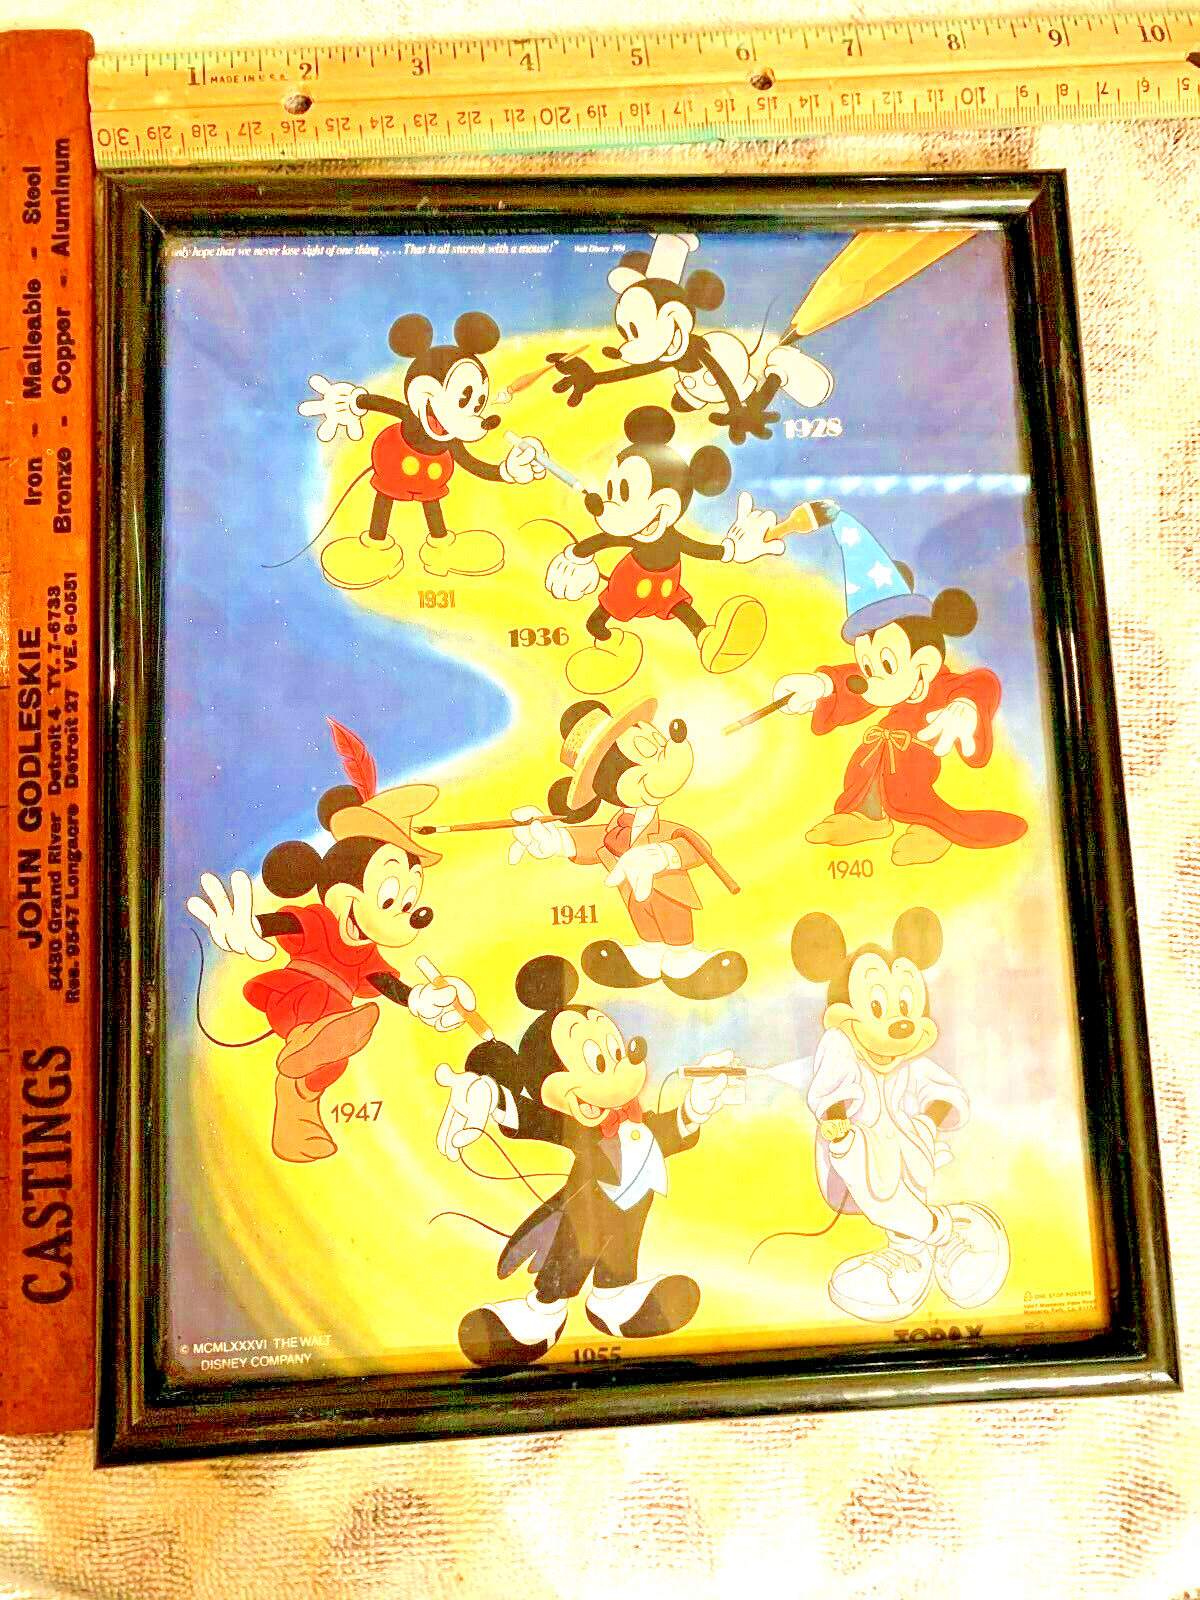 MICKEY MOUSE THE WALT DISNEY COMPANY 1986 FRAMED vintage collectible